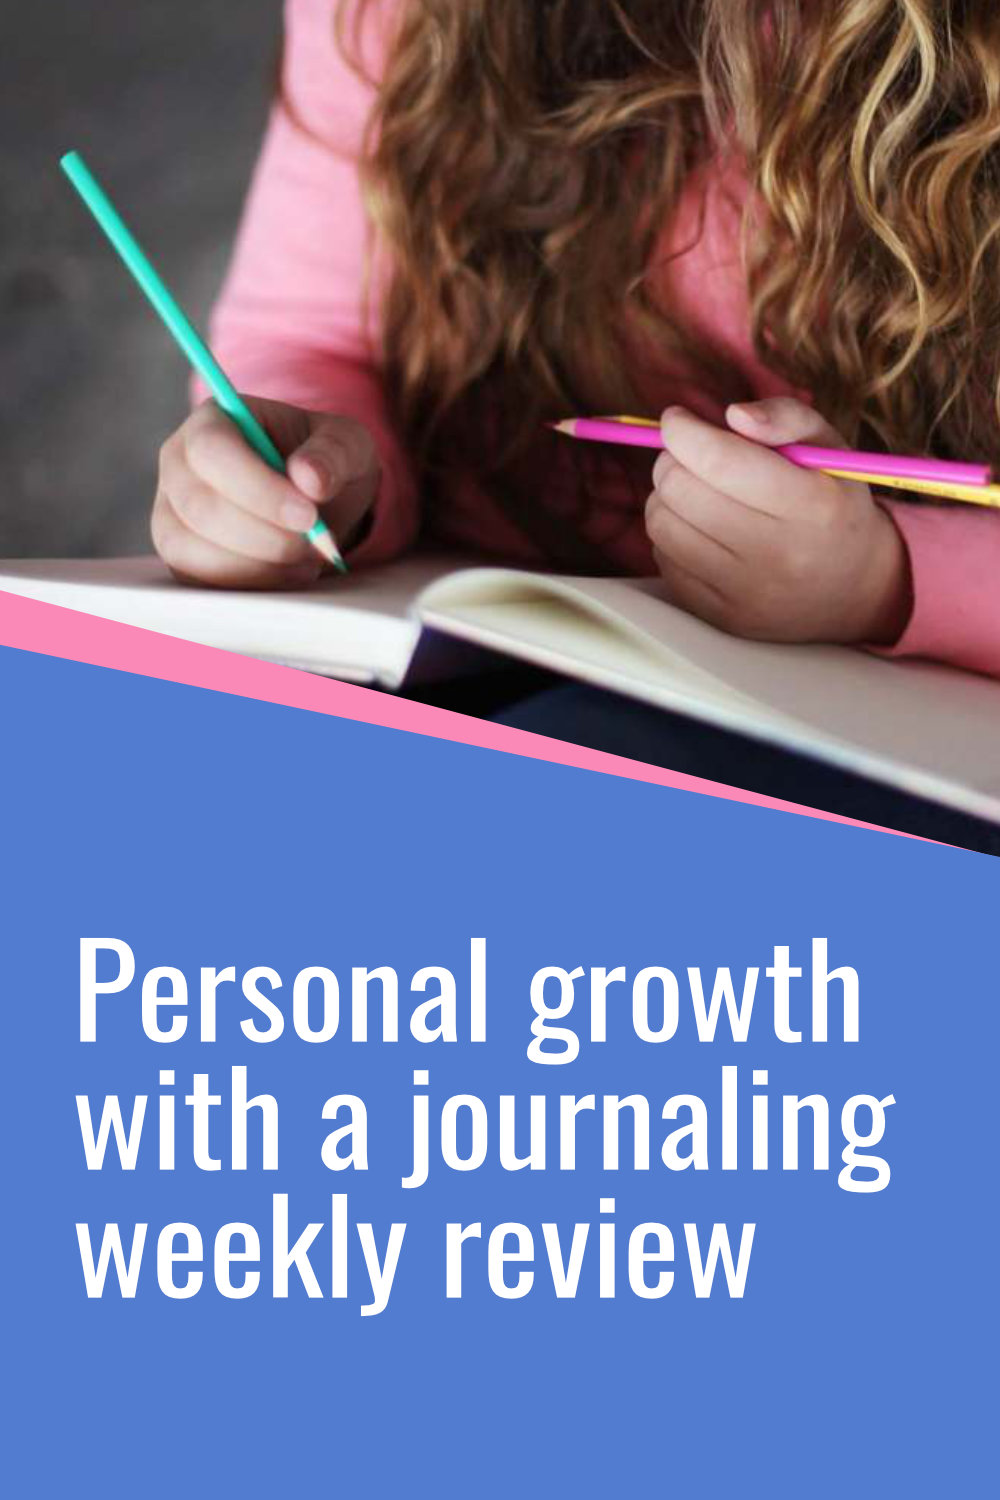 Personal growth through weekly journaling review.